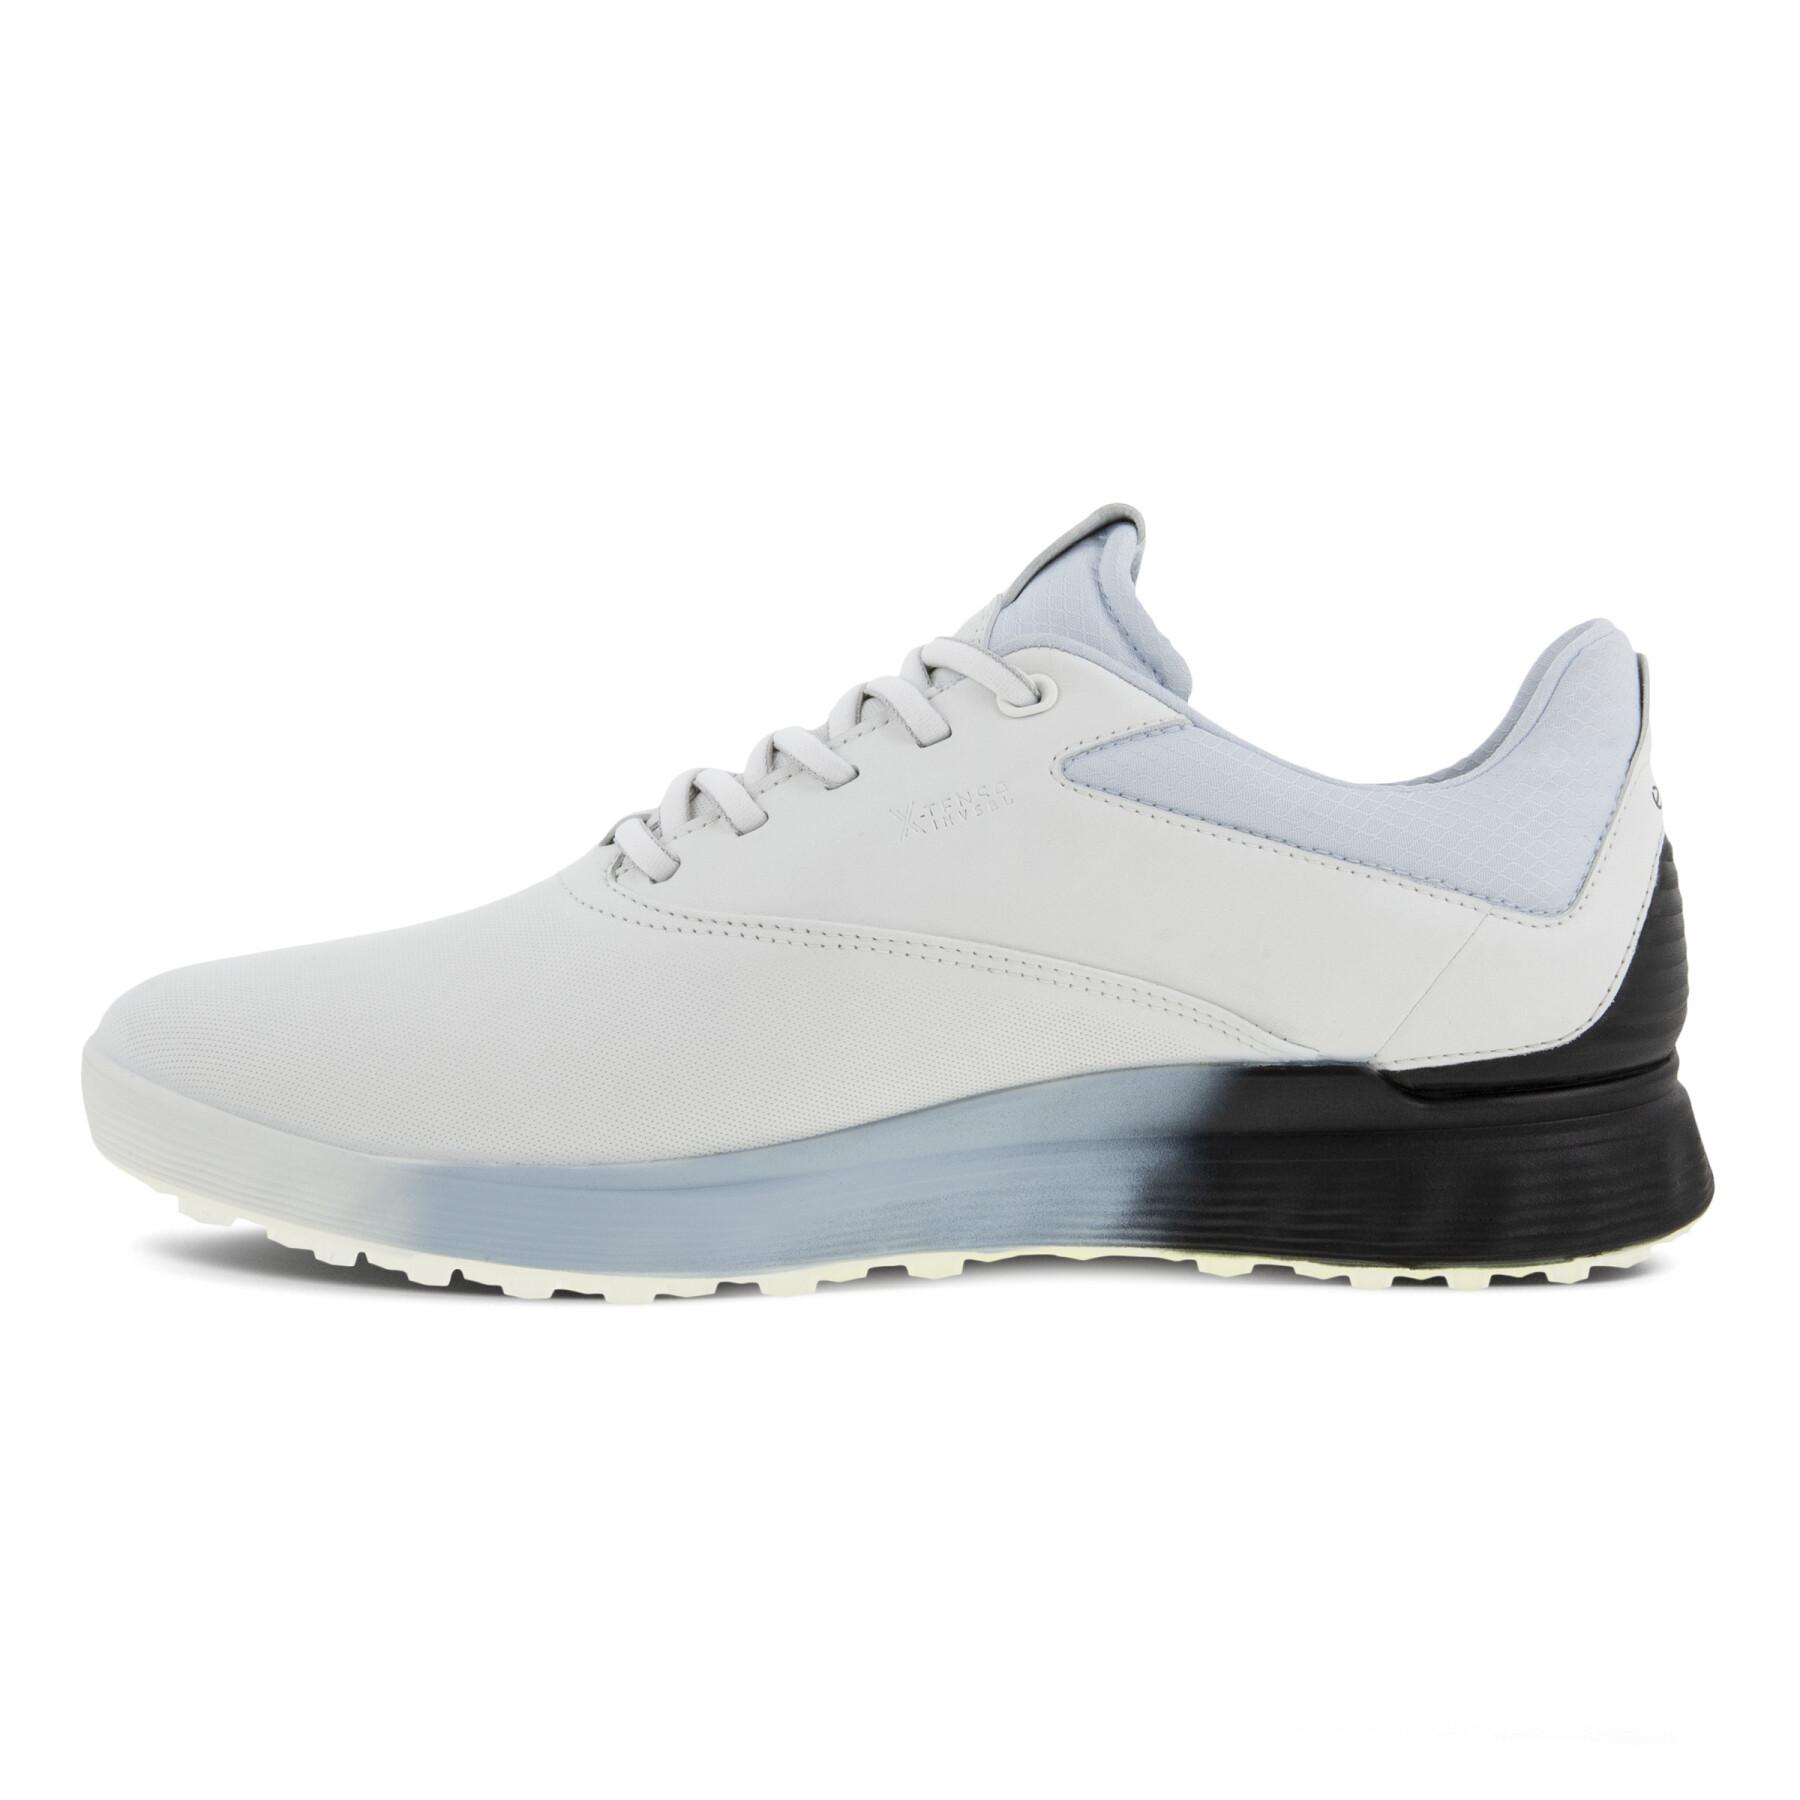 Spikeless golf shoes Ecco S Three